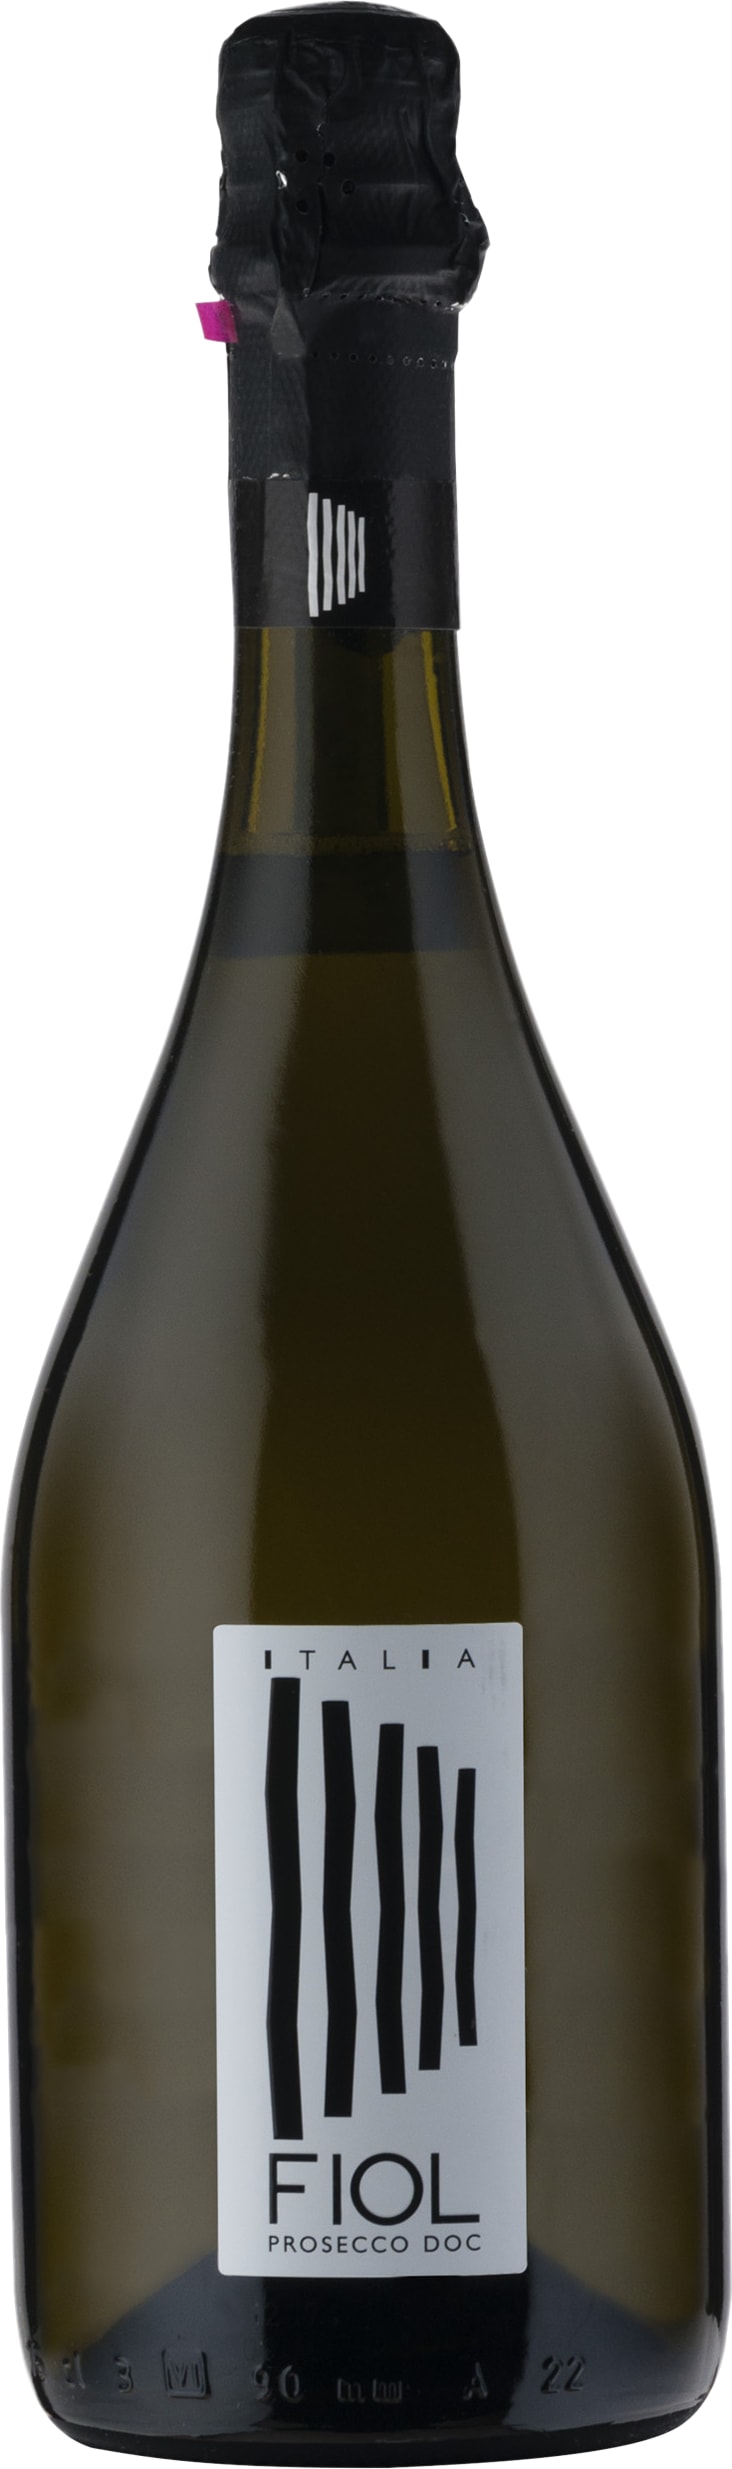 Fiol Prosecco Extra Dry 75cl NV - Buy Fiol Wines from GREAT WINES DIRECT wine shop